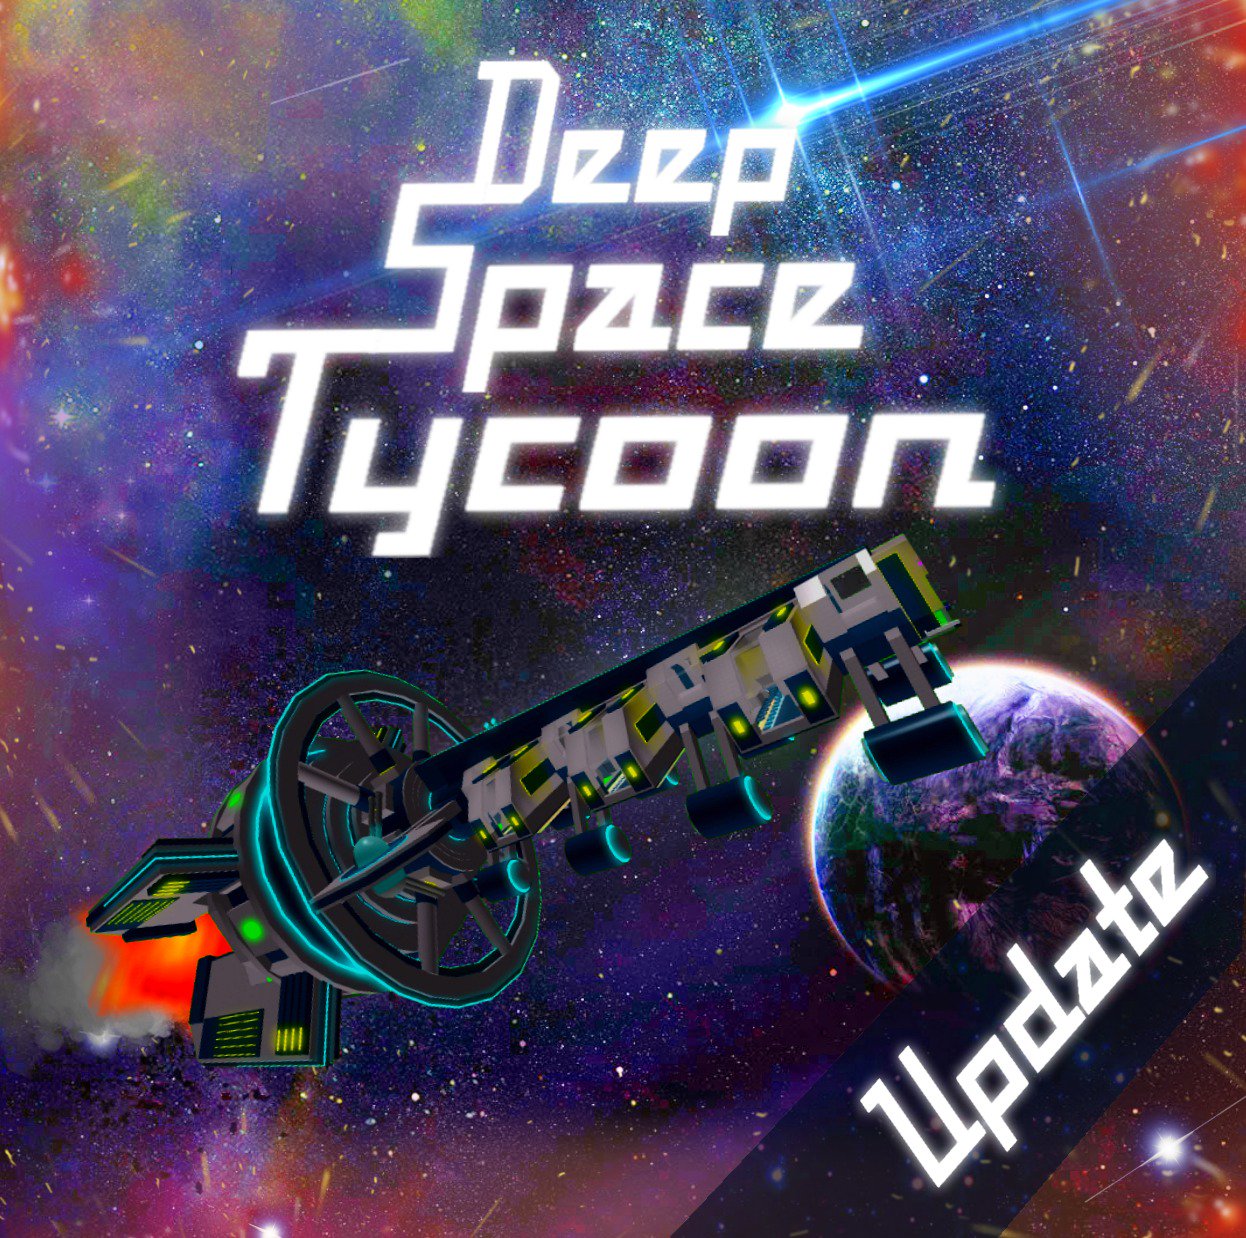 Biggranny000 On Twitter Deep Space Tycoon S New Thumbnail Credit To Clearlyrach For Most Of It And Then I Put In Minor Edits P - roblox deep space tycoon